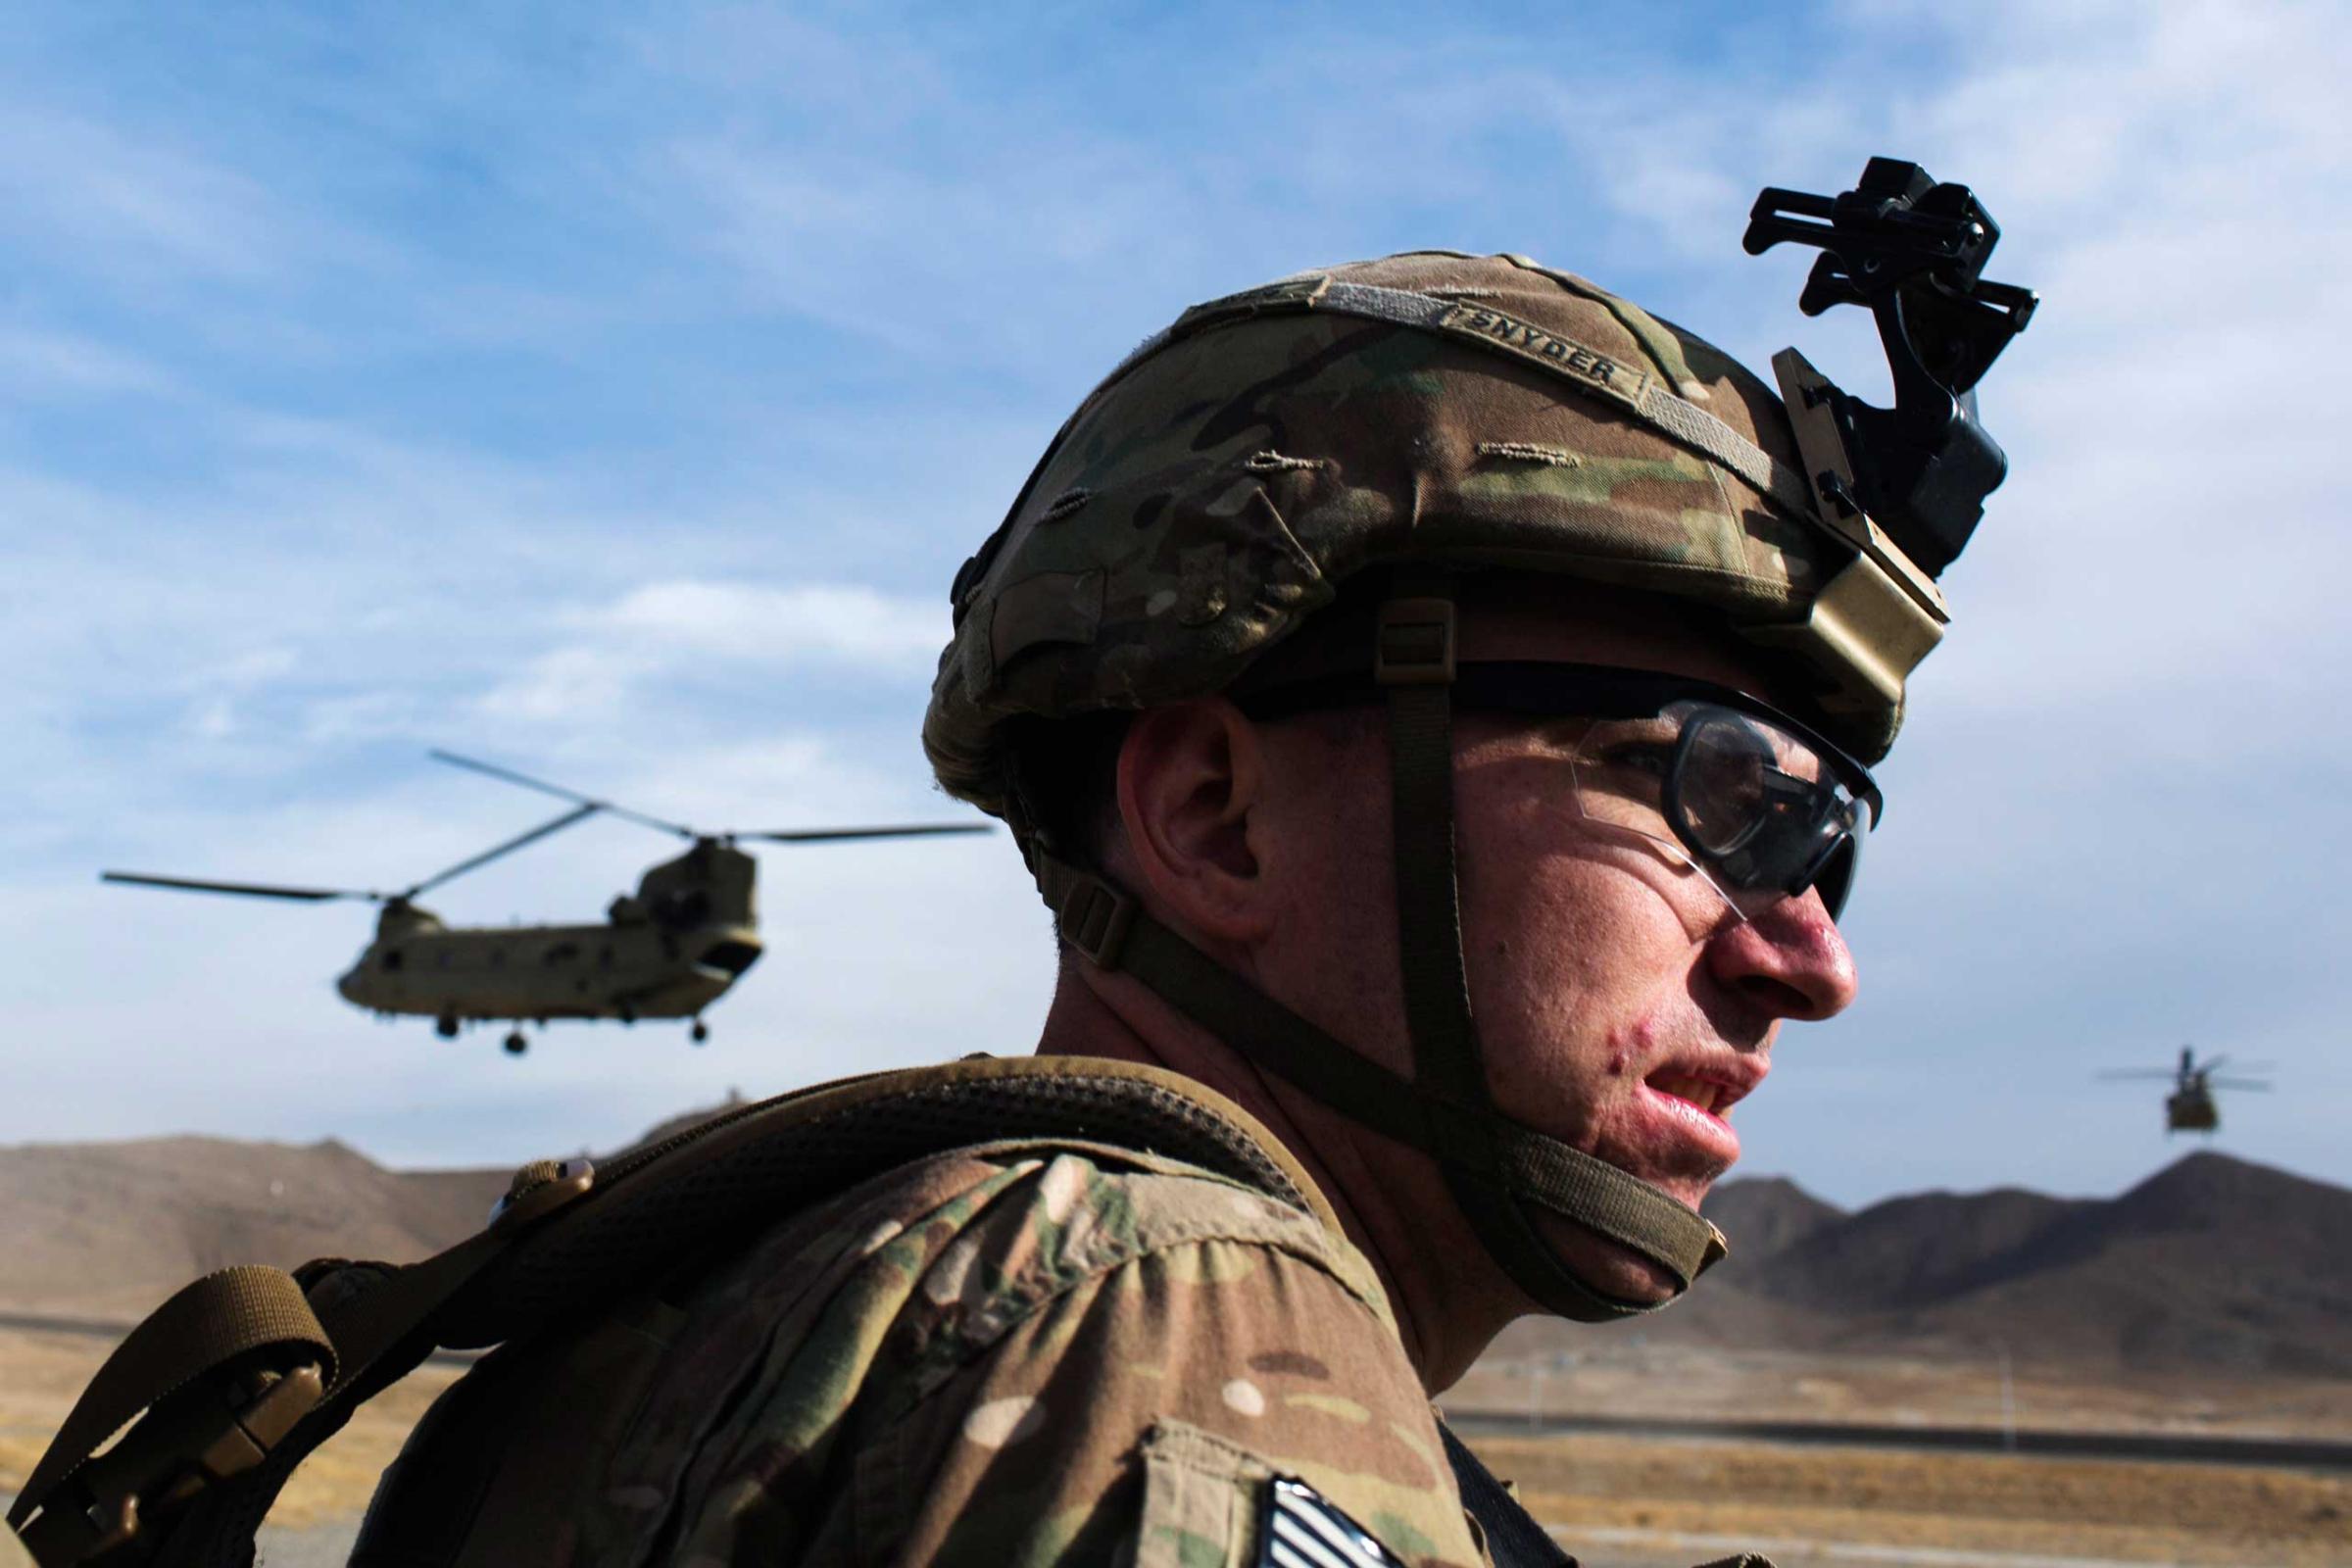 A U.S. soldier from the 3rd Cavalry Regiment waits for a CH-47 Chinook helicopter from the 82nd Combat Aviation Brigade to land after an advising mission at the Afghan National Army headquarters for the 203rd Corps in the Paktia province of Afghanistan Dec. 21, 2014.